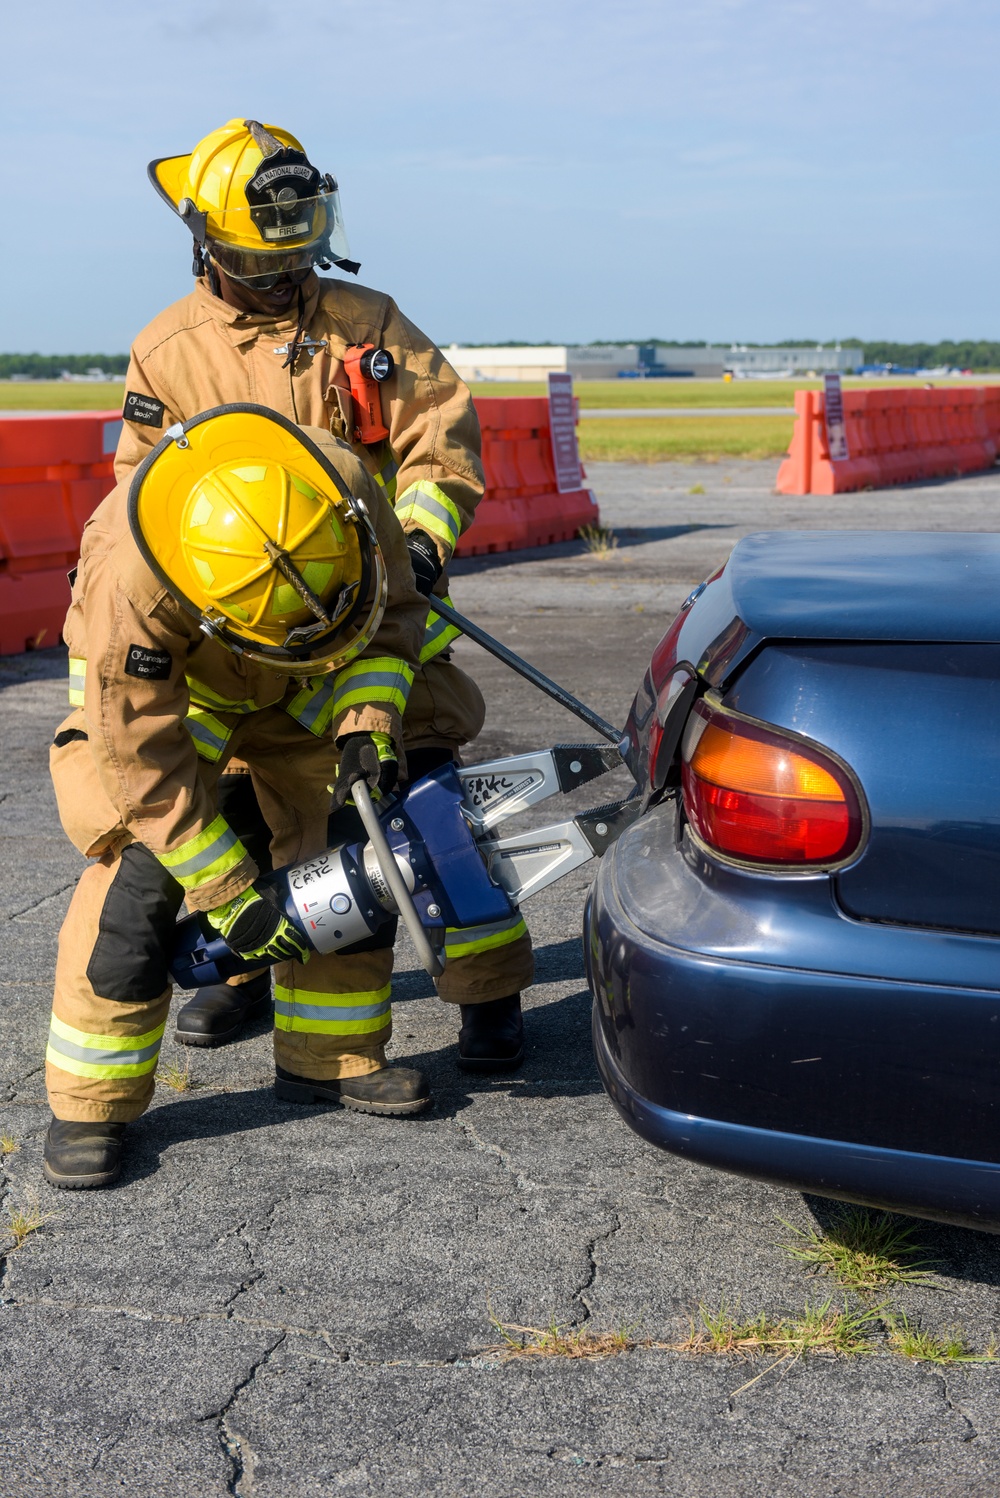 165th AW Firefighters Conduct Vehicle Extraction Exercise